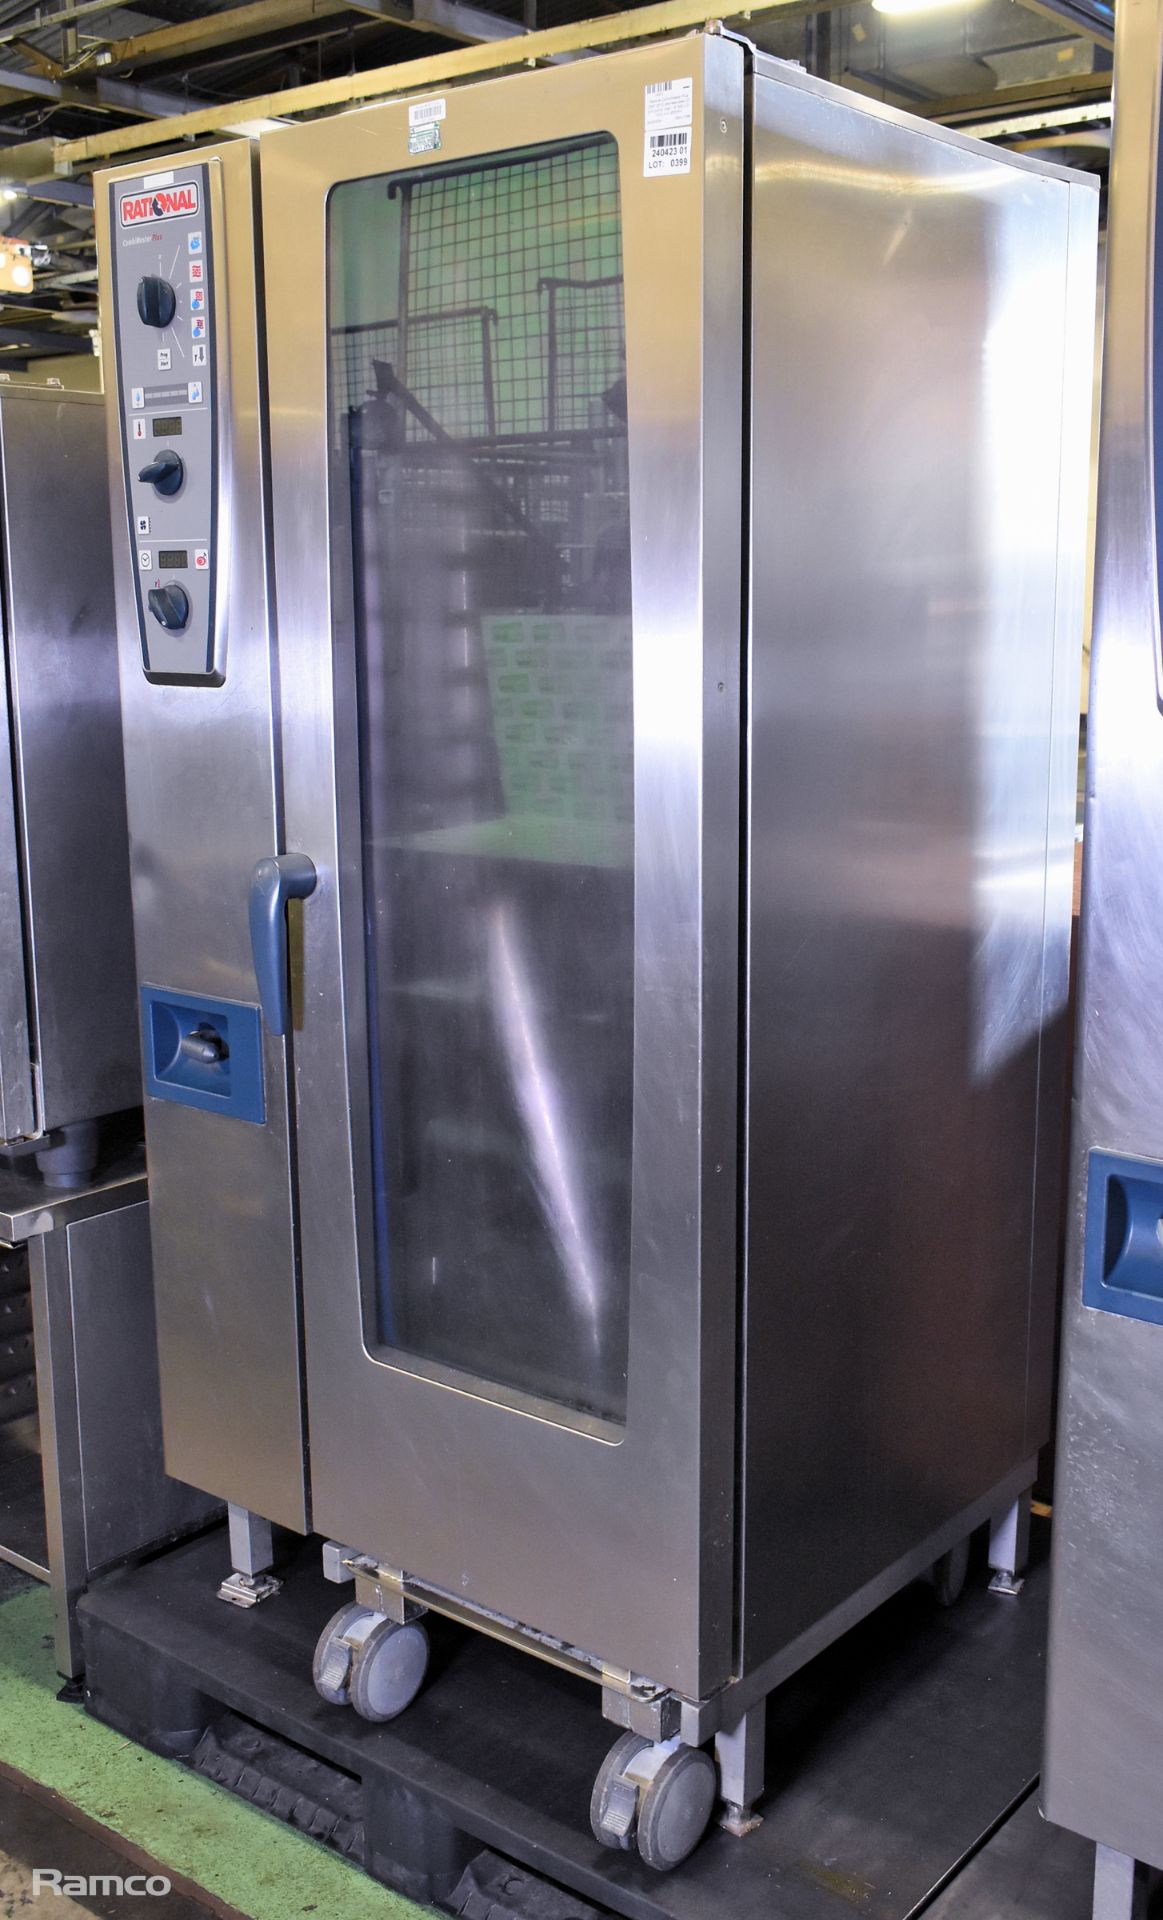 Rational CombiMaster Plus CMP 201G stainless steel 20 grid combi oven - W 880 x D 1000 x H 1850mm - Image 2 of 8